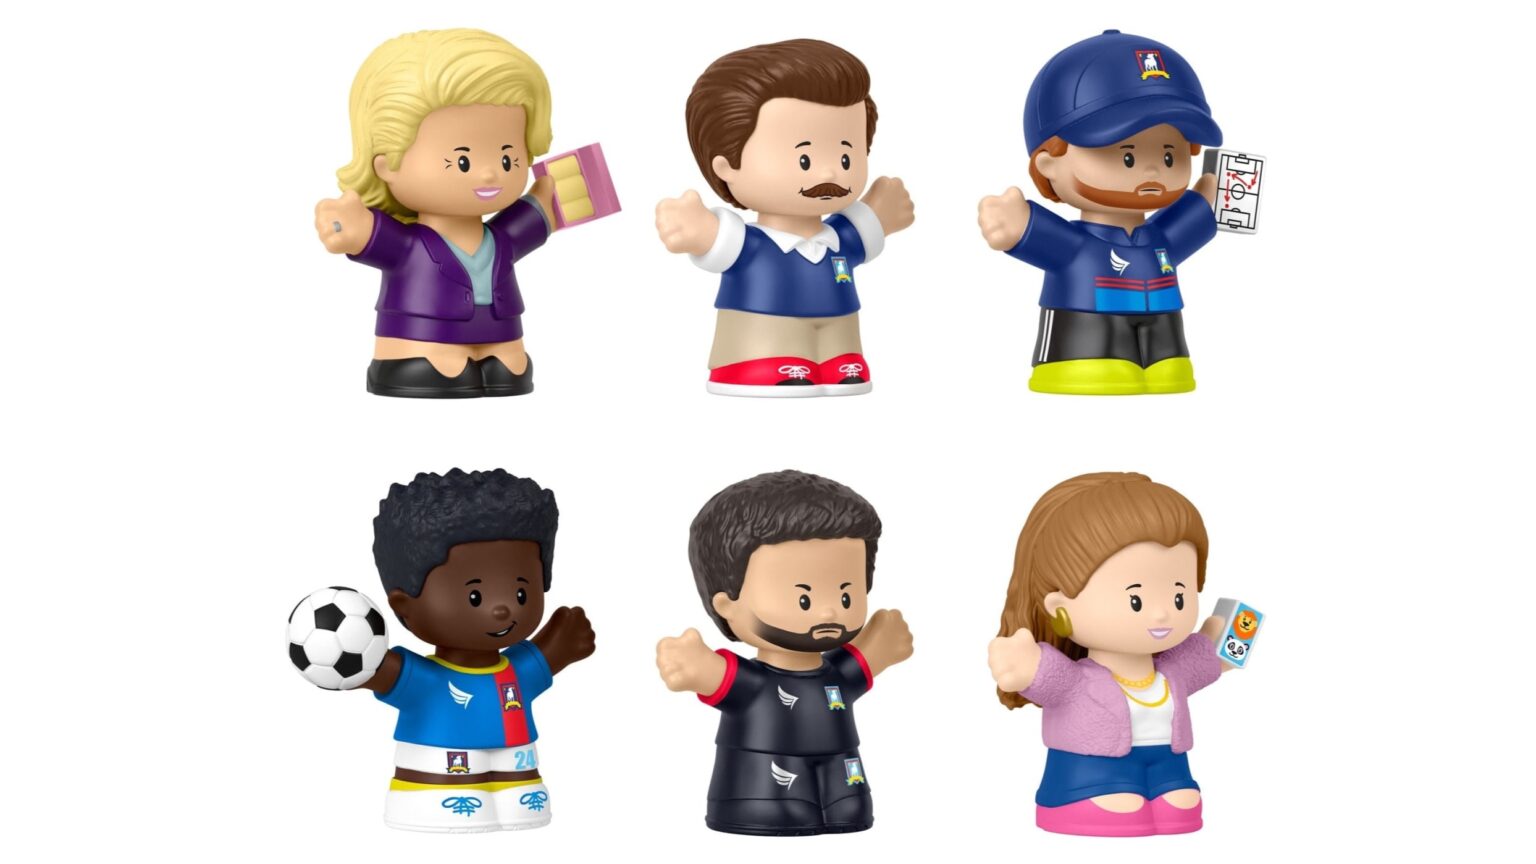 'Ted Lasso' fans need this Fisher-Price Little People Collector figure set' fans need this Fisher-Price Little People Collector figure set